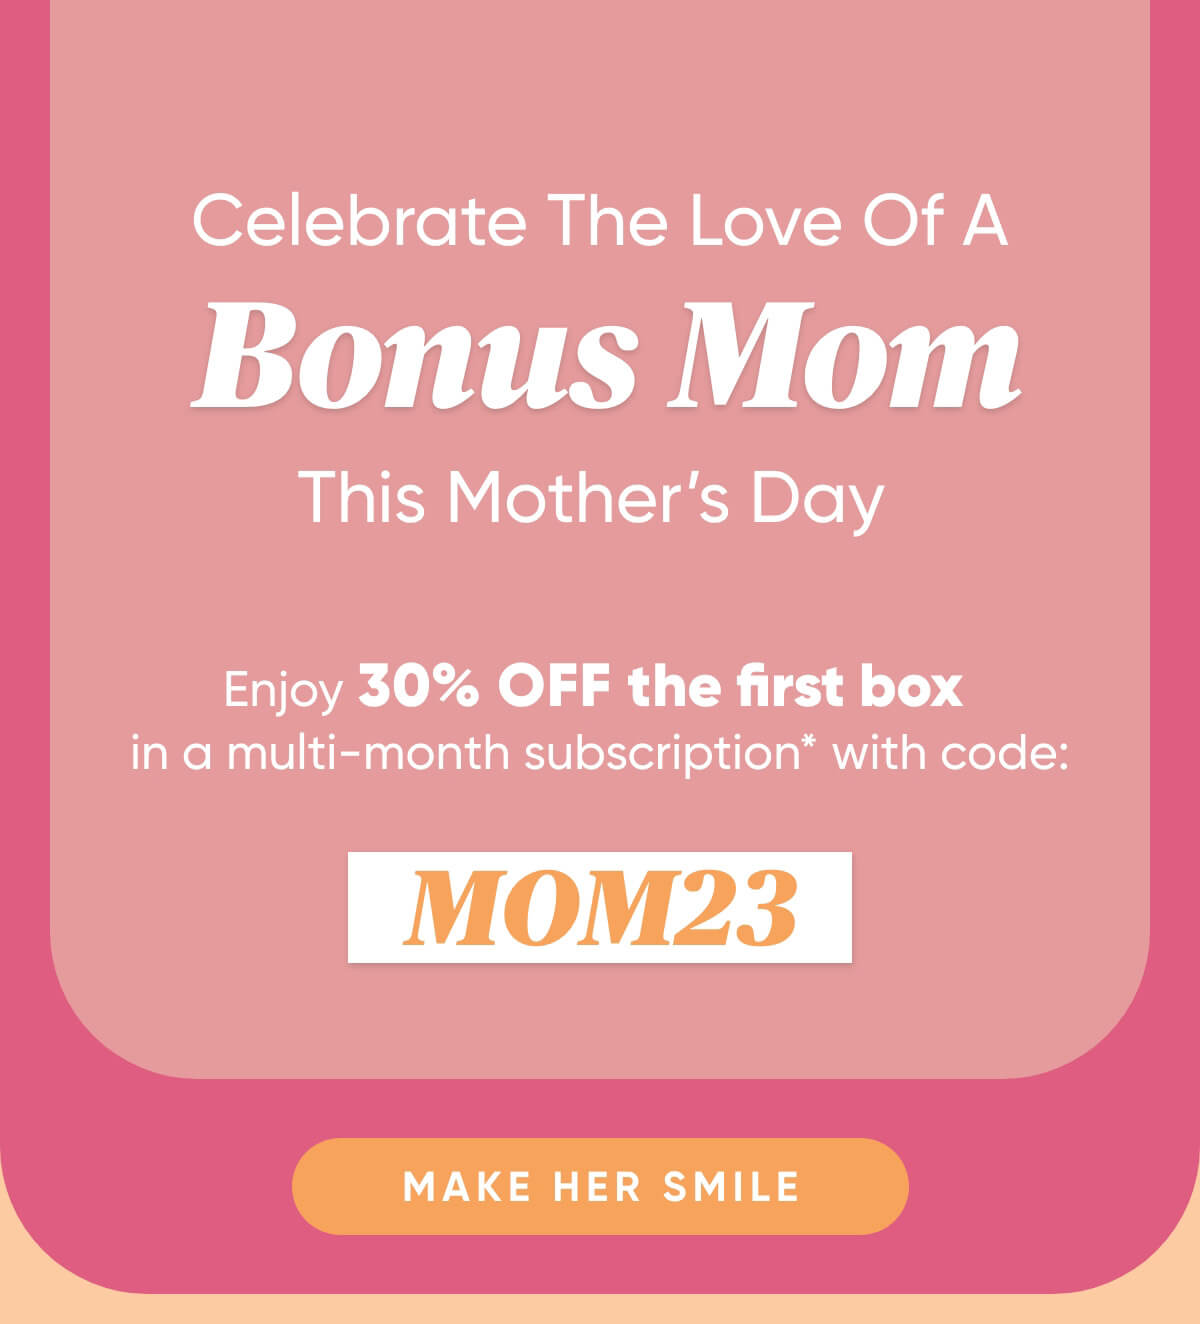 Celebrate The Love Of A Bonus Mom This Mothers Day   Enjoy 30% off the first box in a 3+ month subscription* with code: MOM23  Make Her Smile